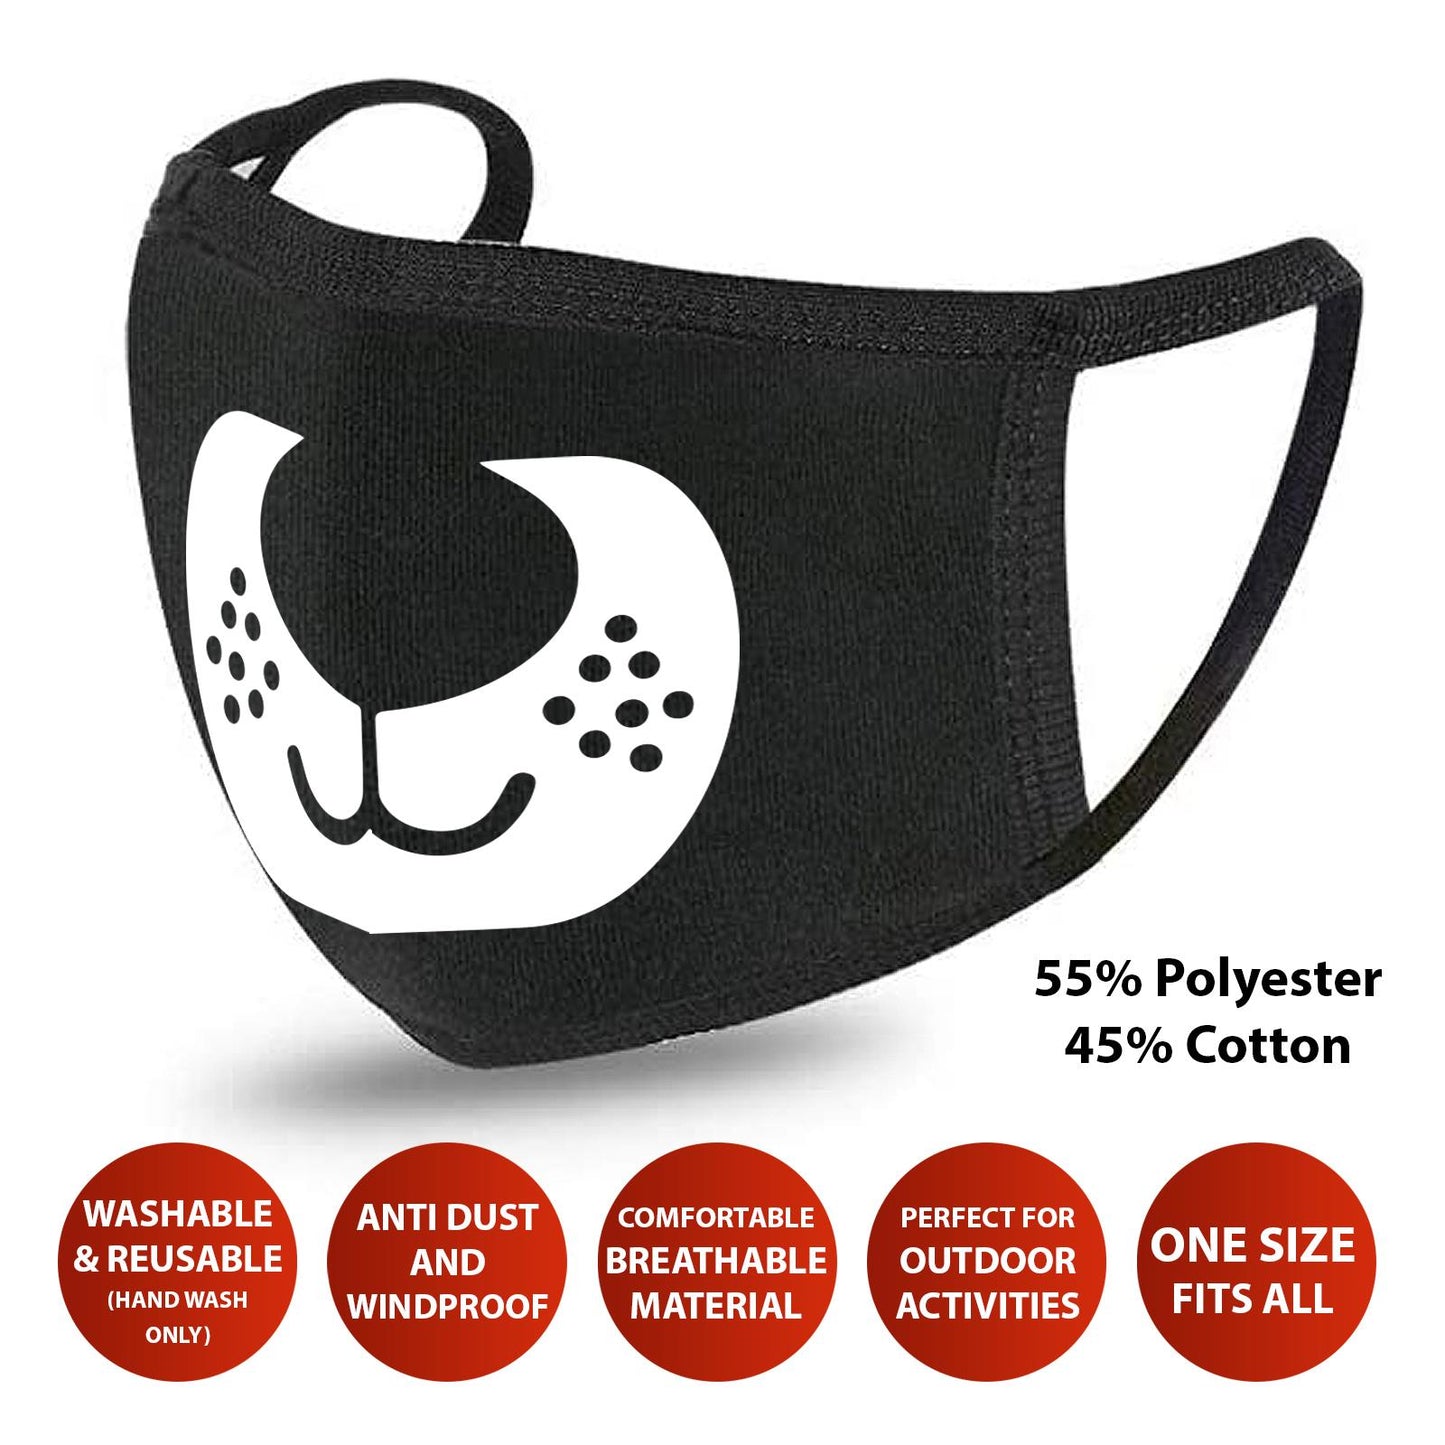 Stay Safe and Stylish with Reusable Face Masks